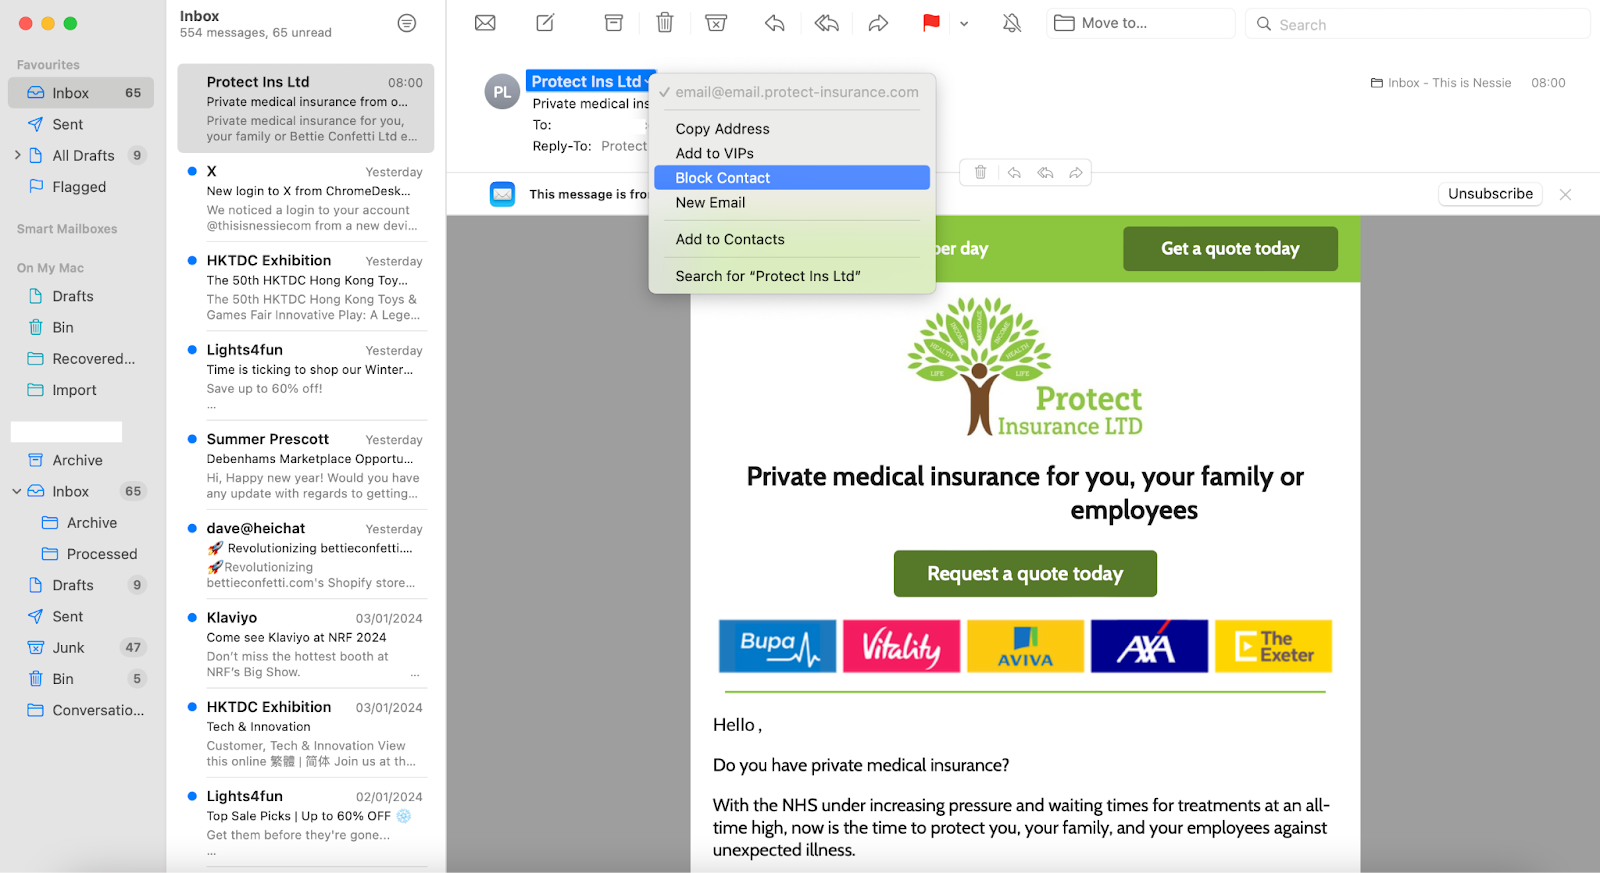 How to Block Emails on iCloud